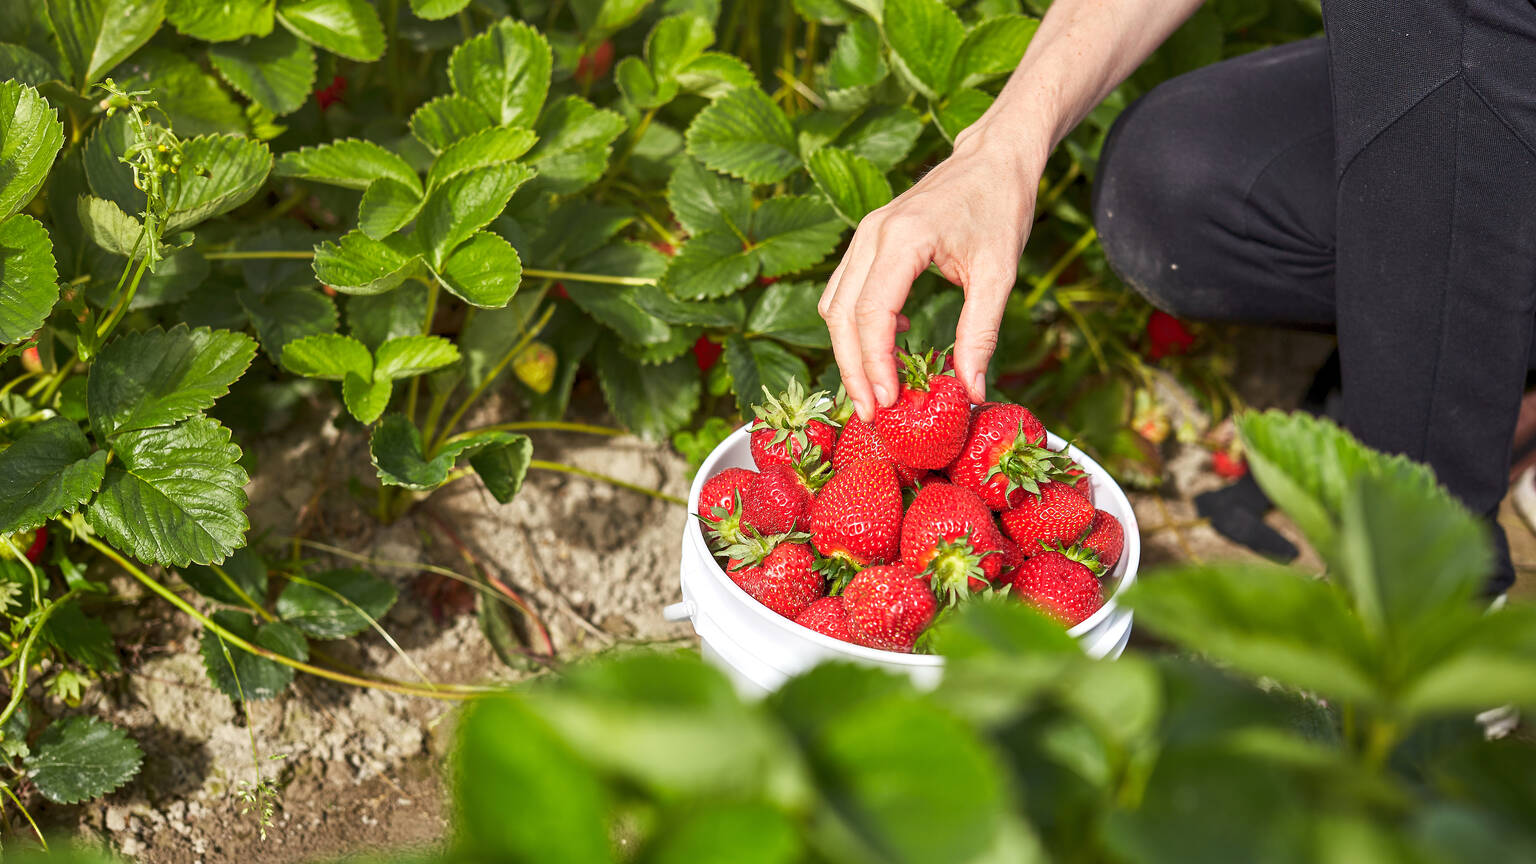 Best Berry Picking at Farms Near Chicago For Strawberries, Cherries & More